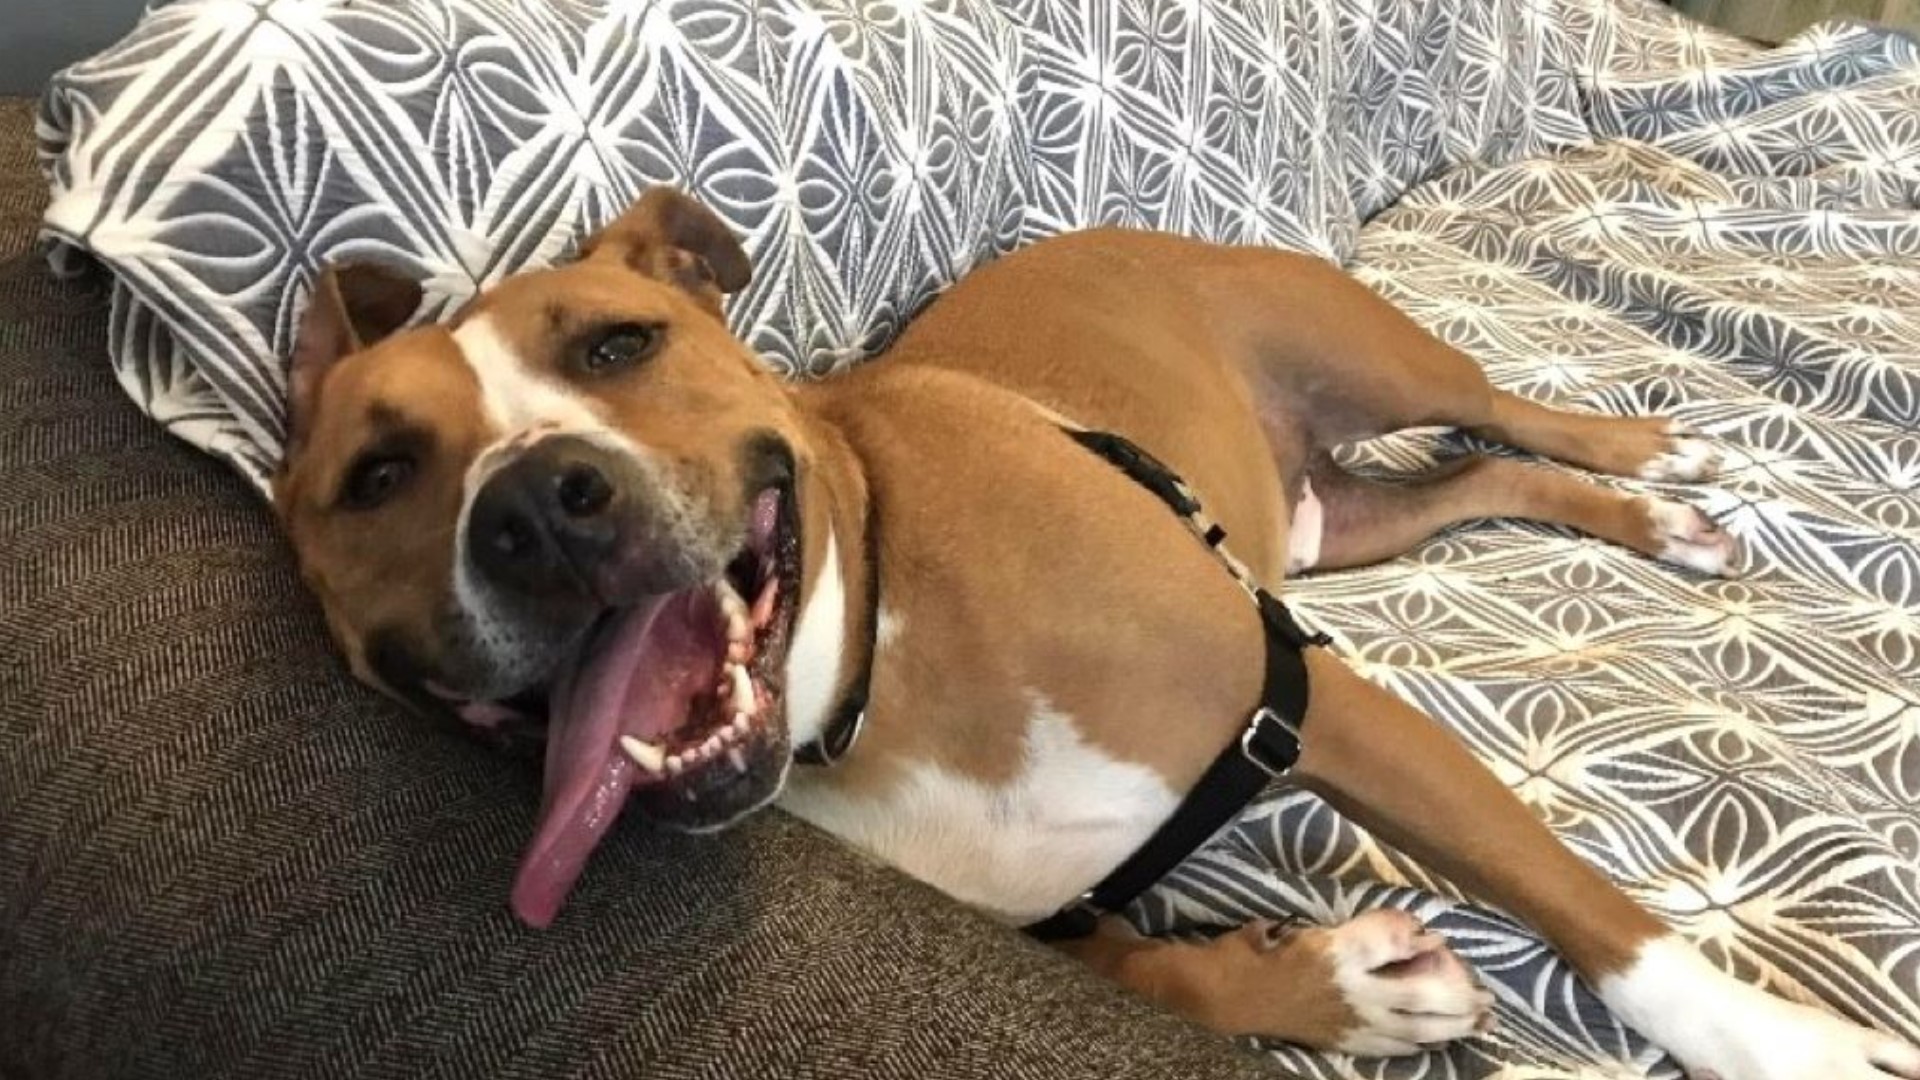 A potential adopter did a 'meet and greet' with their dog and Hershel. Things went so well that Hershel went home with them for a week-long foster-to-adopt trial.